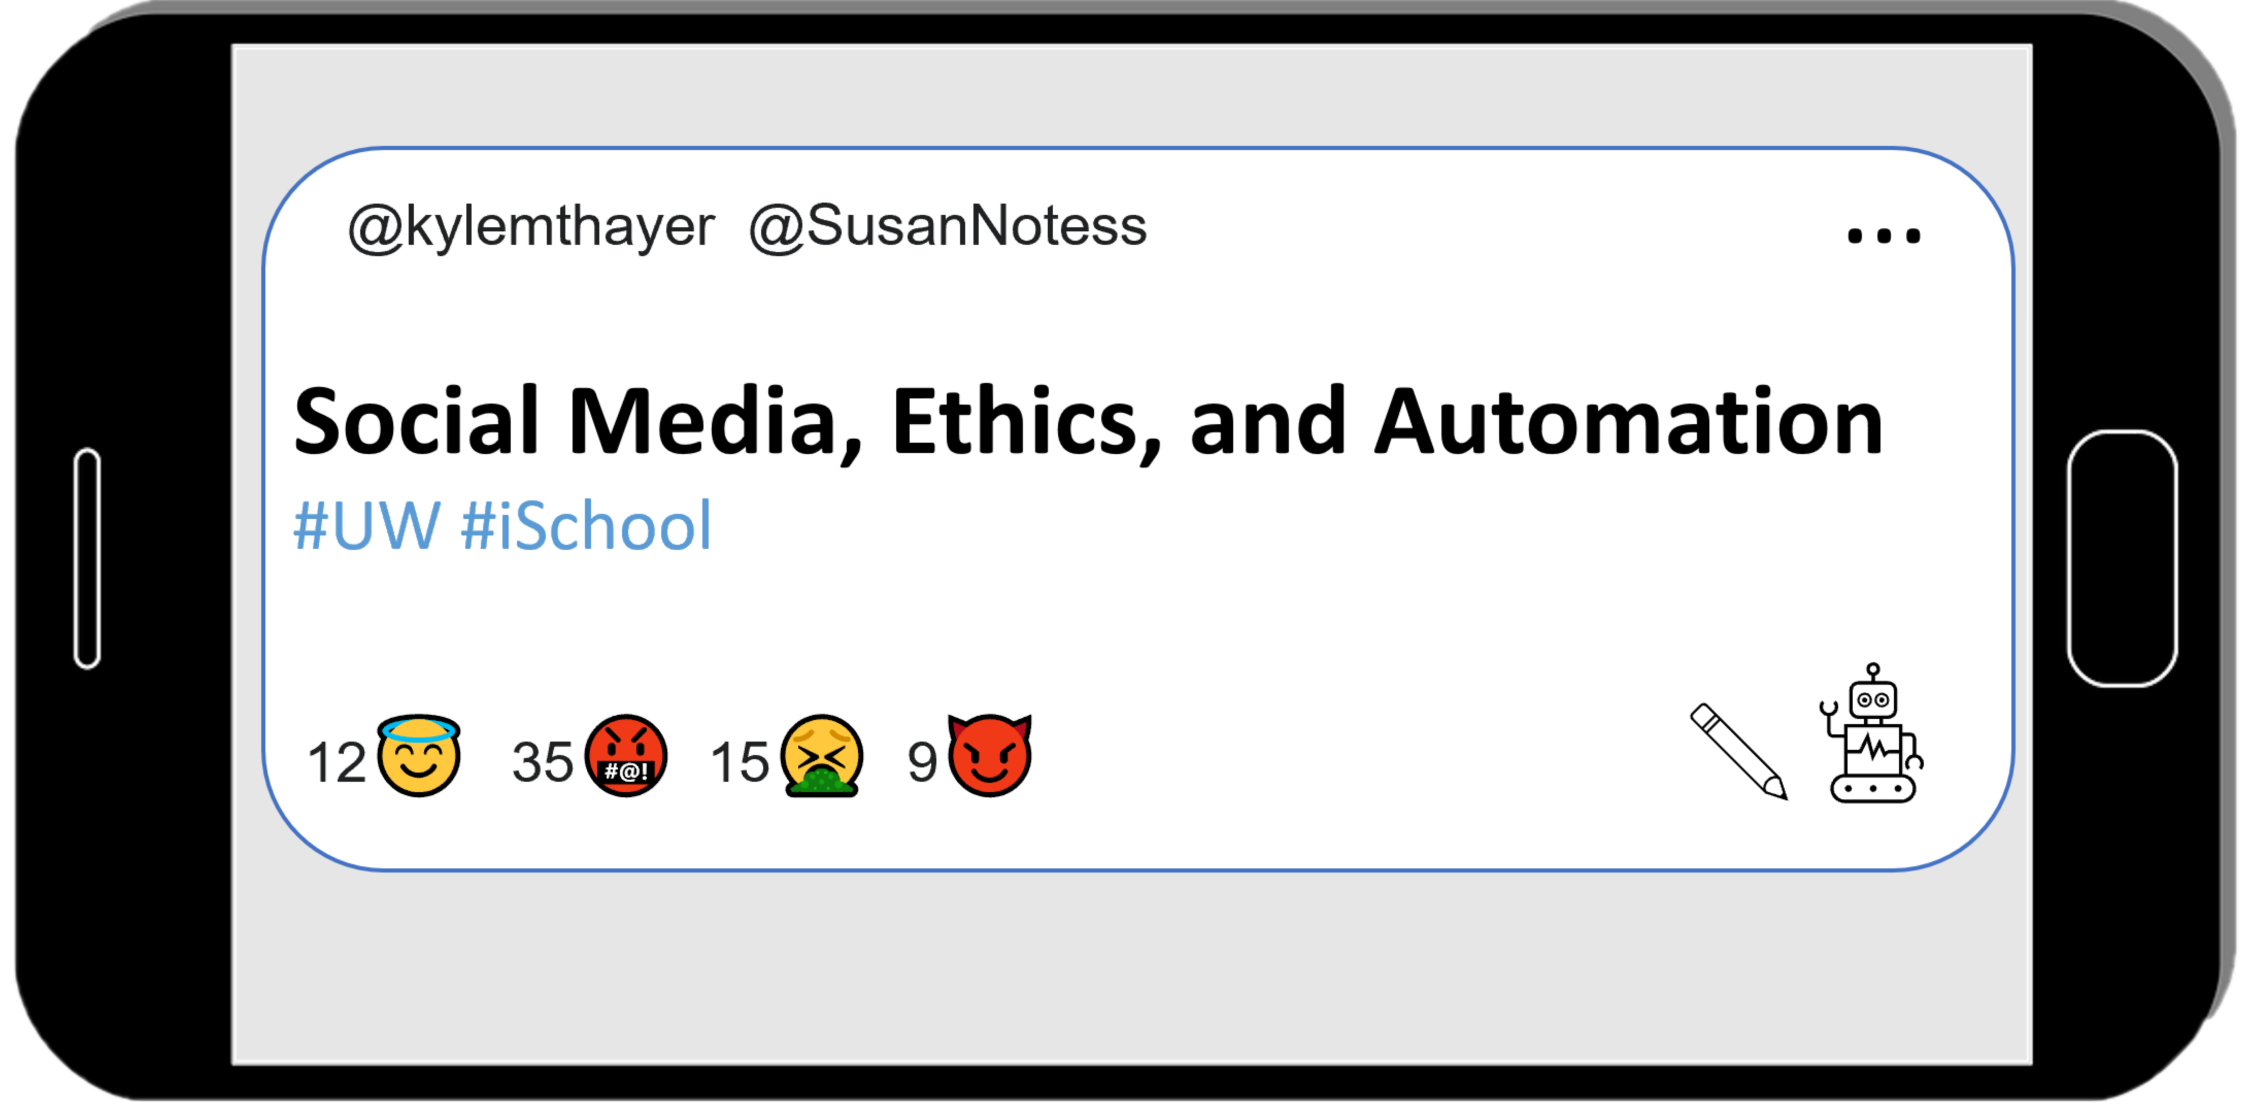 Logo for the book, which looks like a phone with a social media post open, by Kyle Thayer and Susan Notess called "Social Media, Ethics, and Automation." There are various emoji reactions to it.